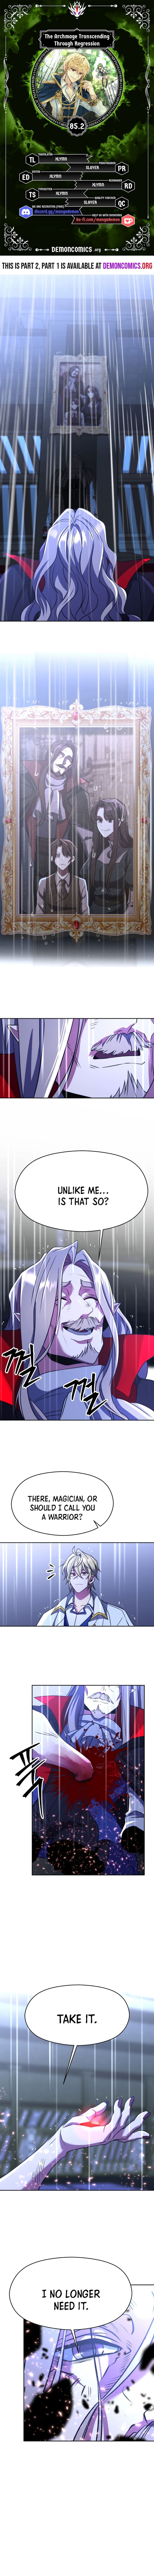 Archmage Transcending Through Regression Chapter 85.2 page 1